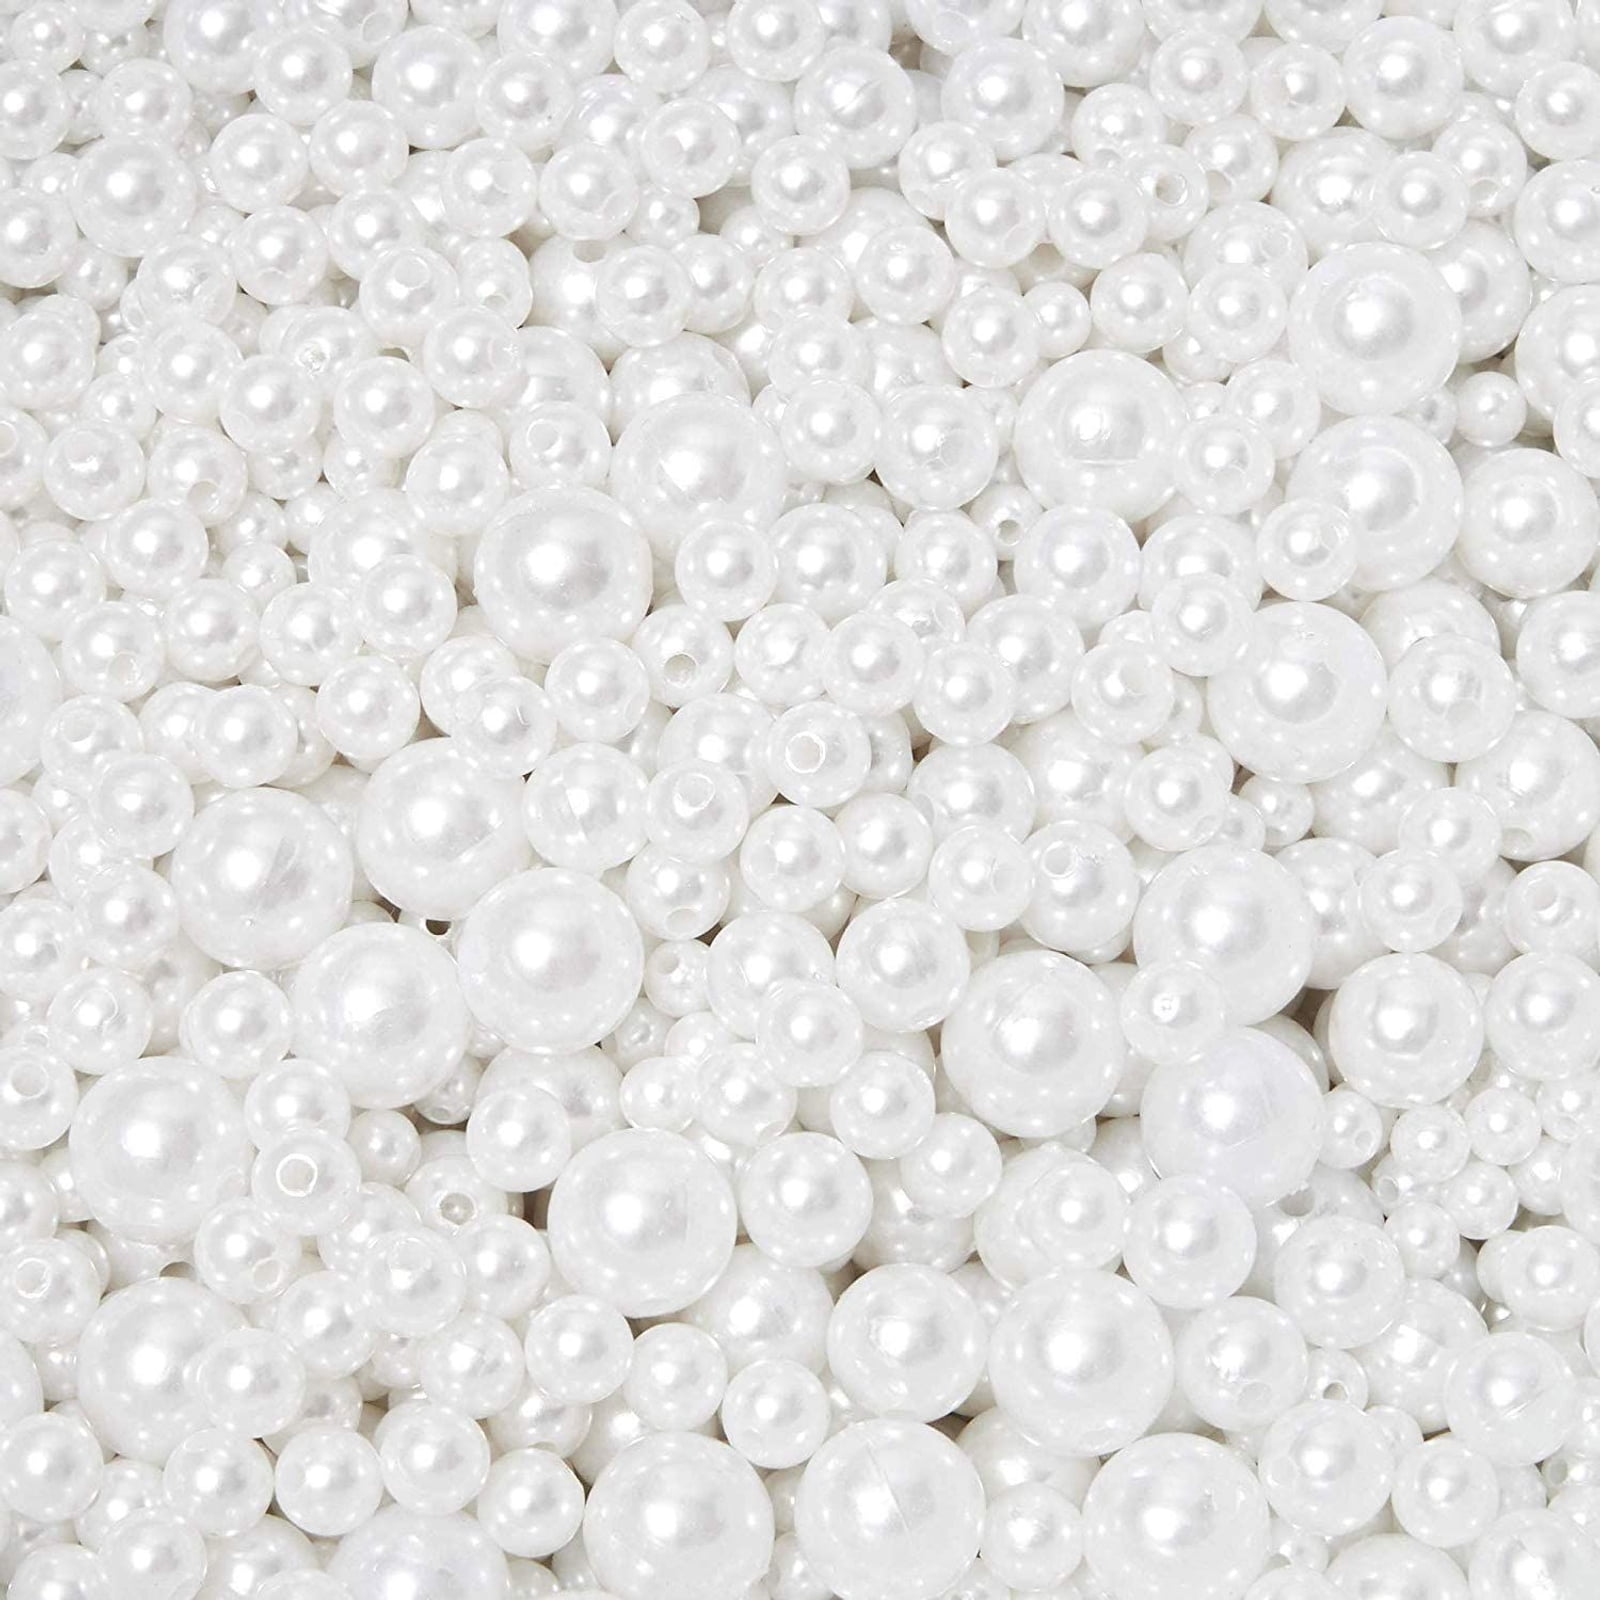 500 Pieces Pure White Half-Round Pearl Beads for Crafts Assorted Mixed Sizes